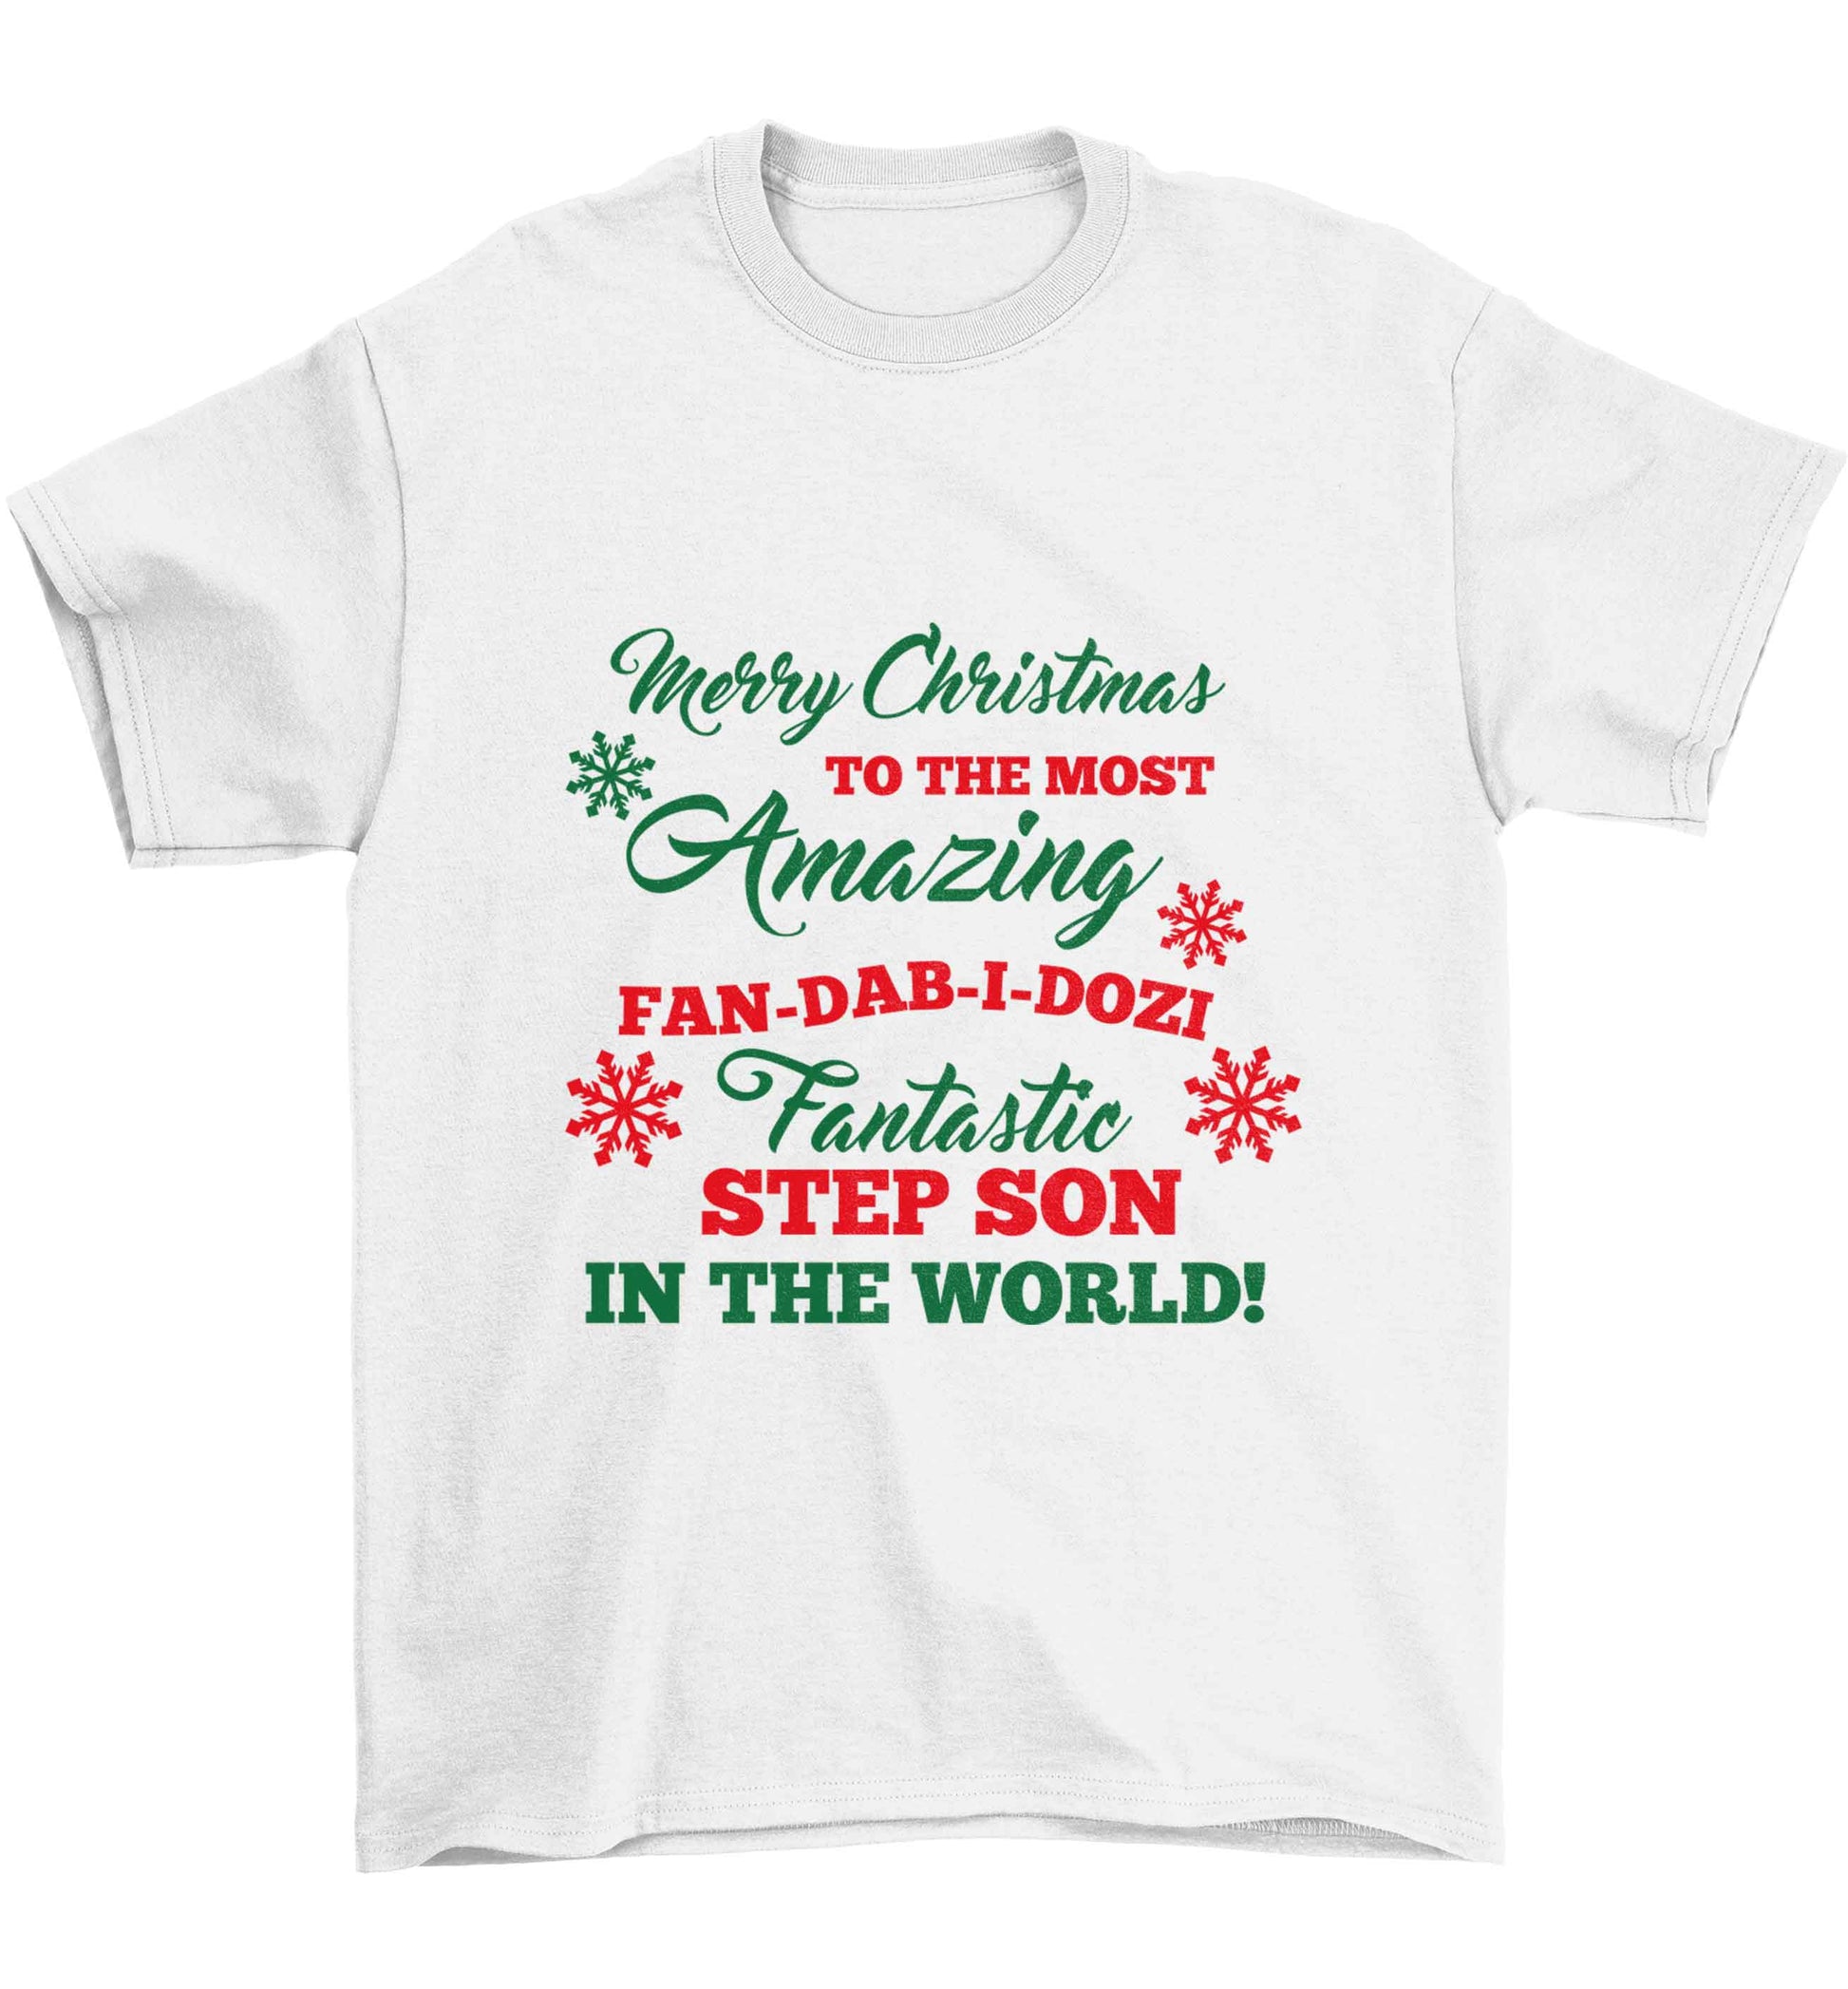 Merry Christmas to the most amazing fan-dab-i-dozi fantasic Step Son in the world Children's white Tshirt 12-13 Years